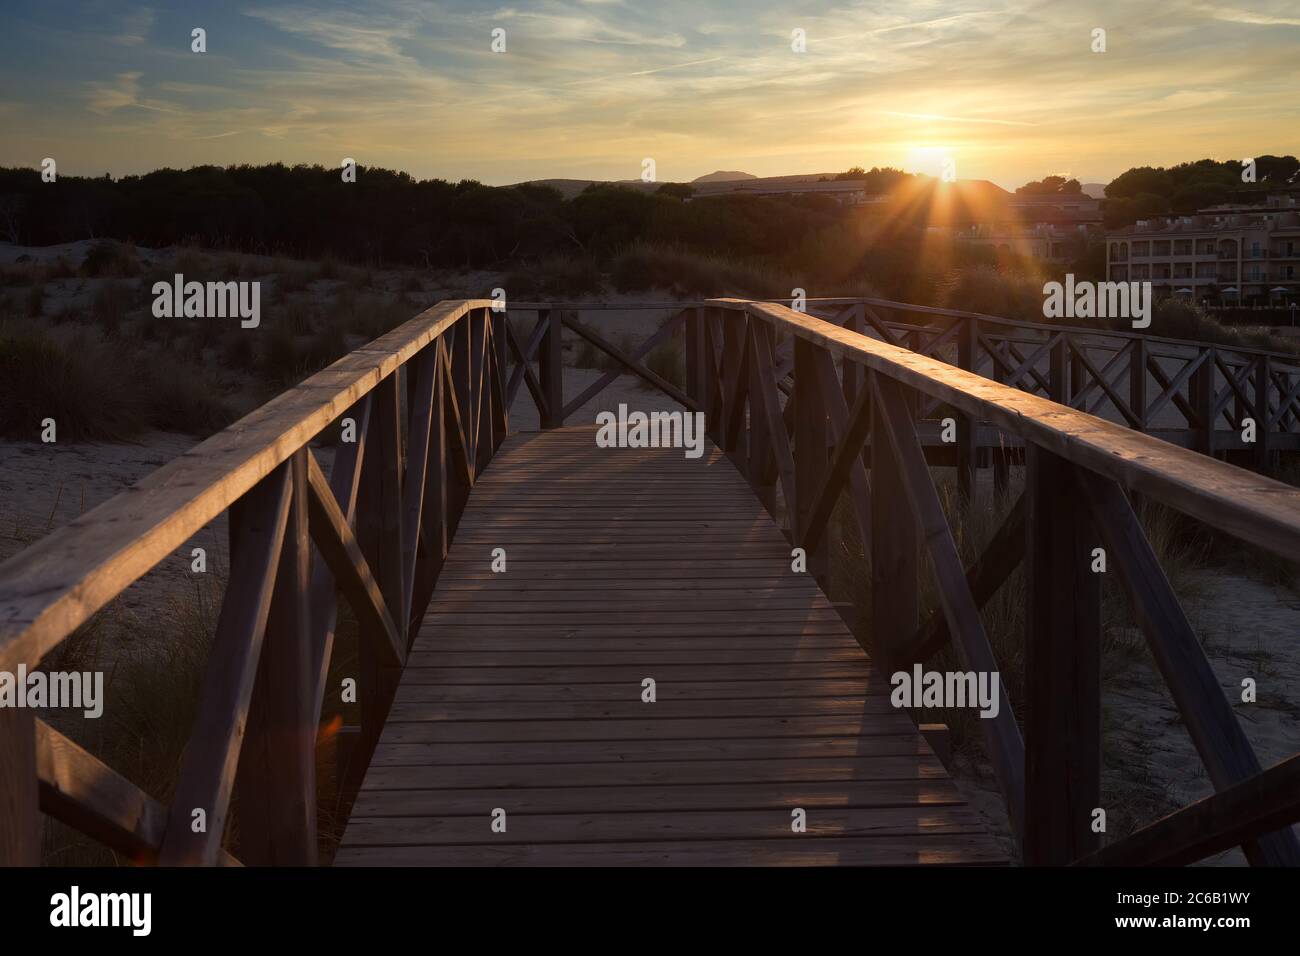 Europe Spain Mallorca - Dunes of Cala Mesquida at sunset, Wooden pier by backlight, Stock Photo